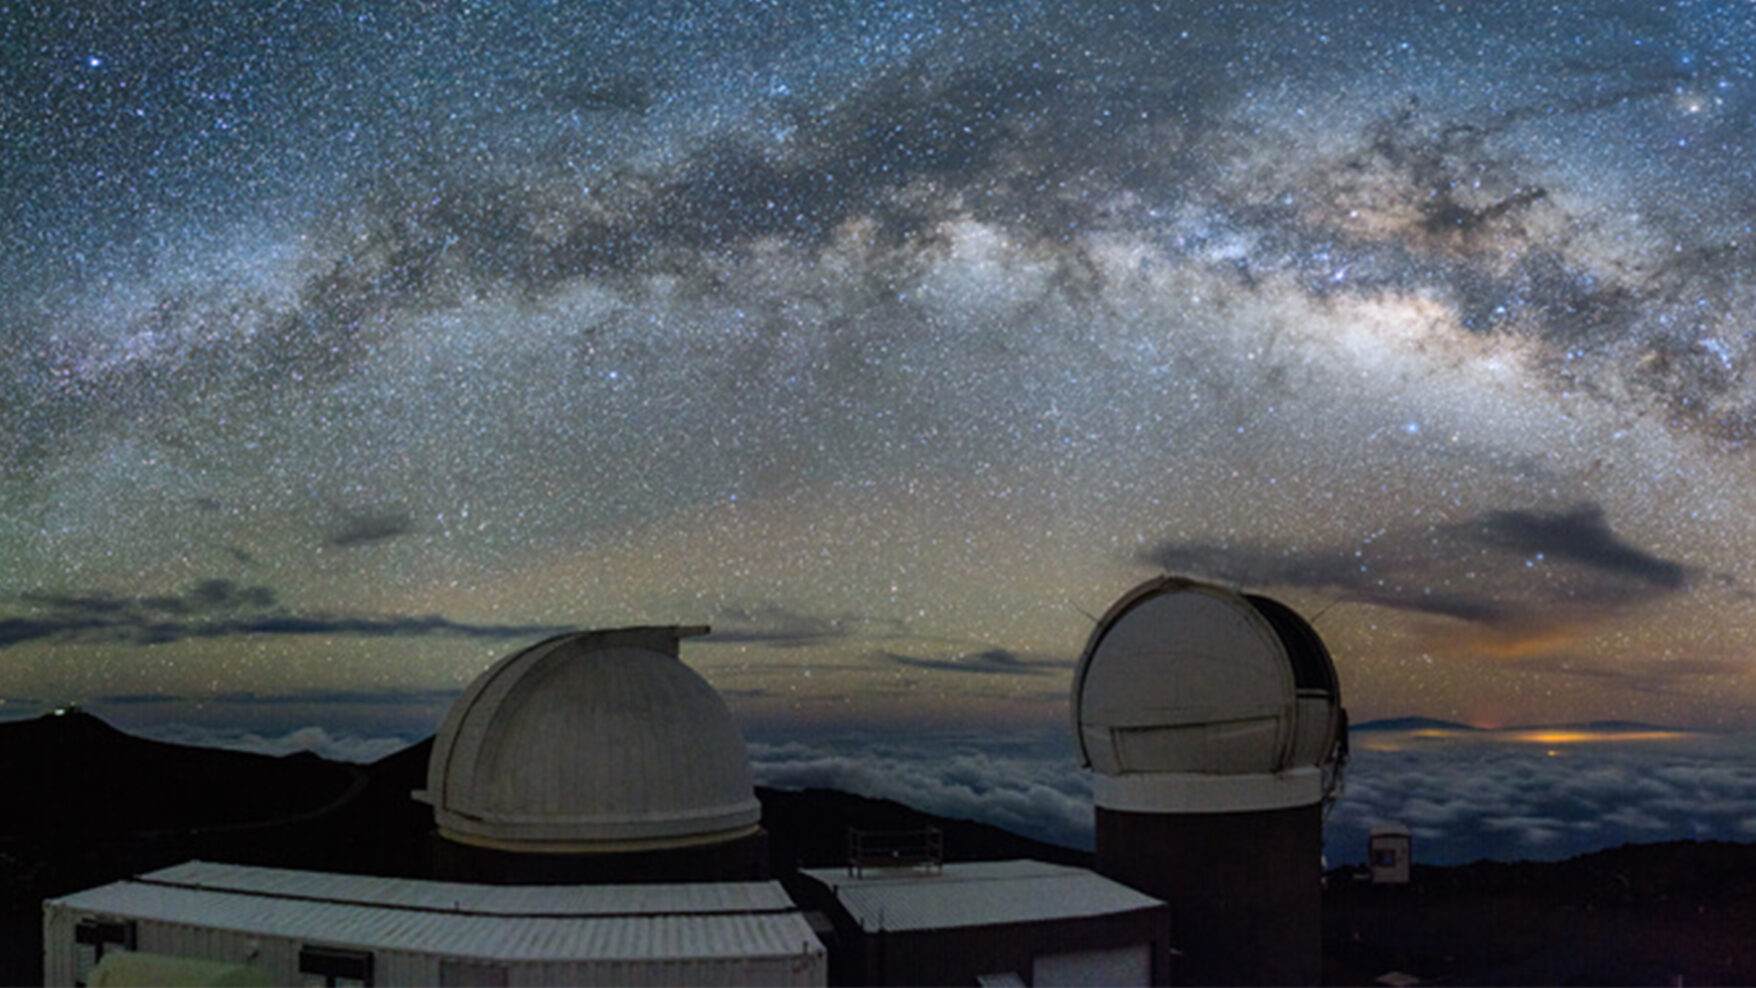 A starry night sky with the Pan-STARRS telescopes.